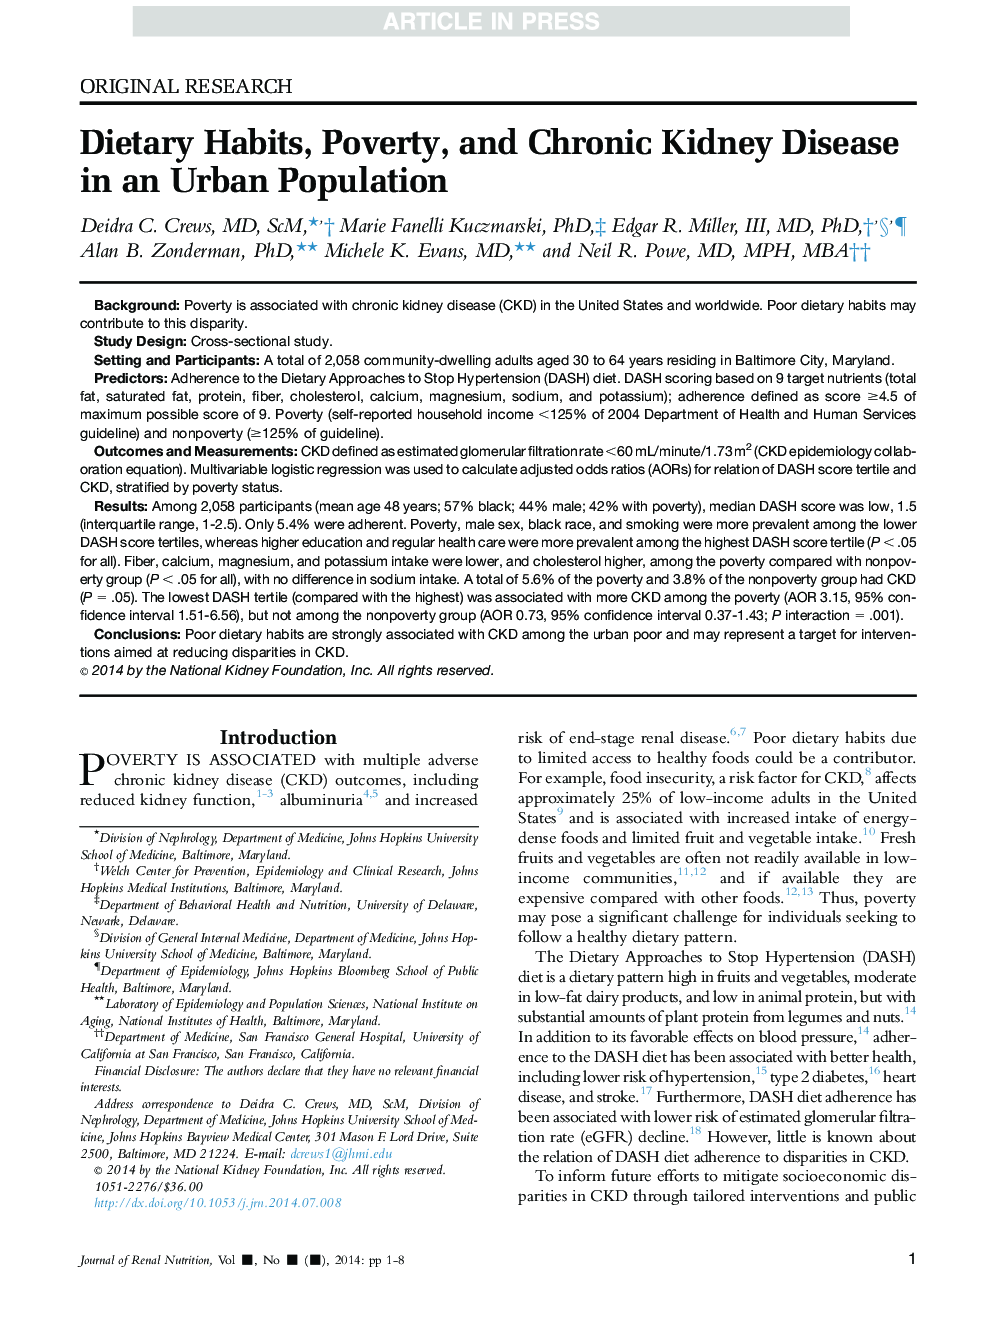 Dietary Habits, Poverty, and Chronic Kidney Disease in an Urban Population